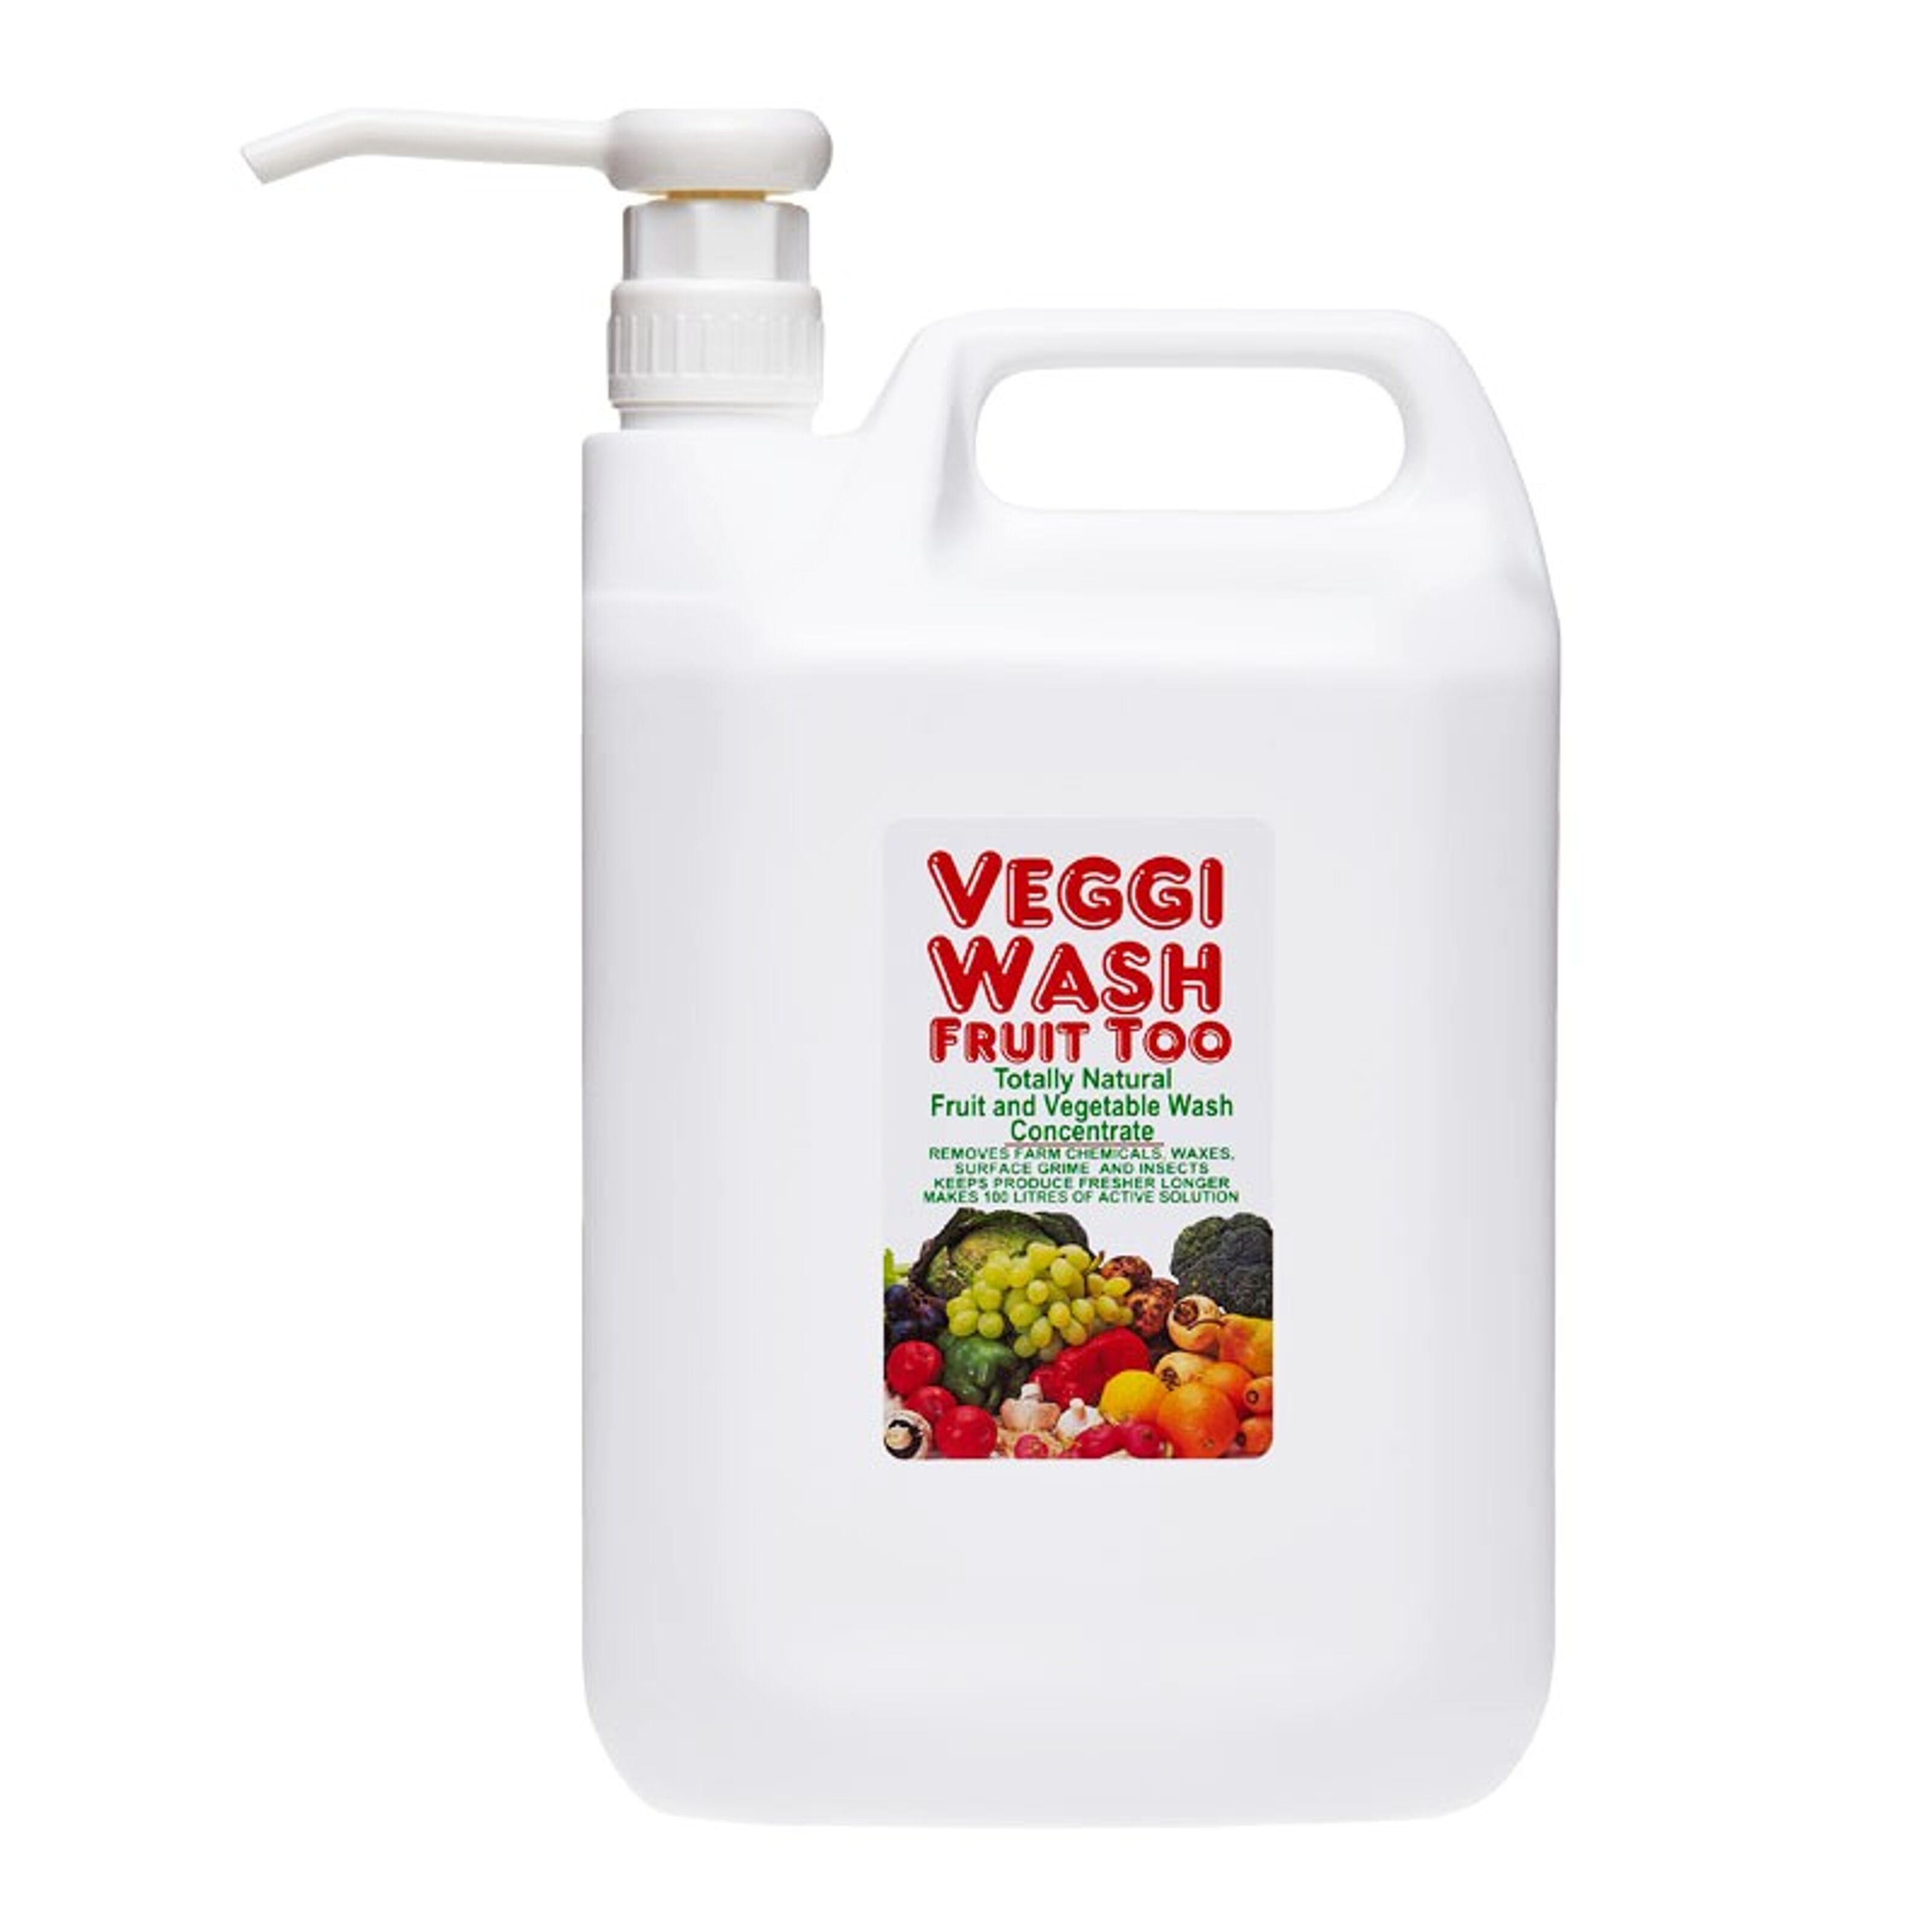 Buy wholesale Veggi Wash Fruit Too Bulk Concentrate with pump